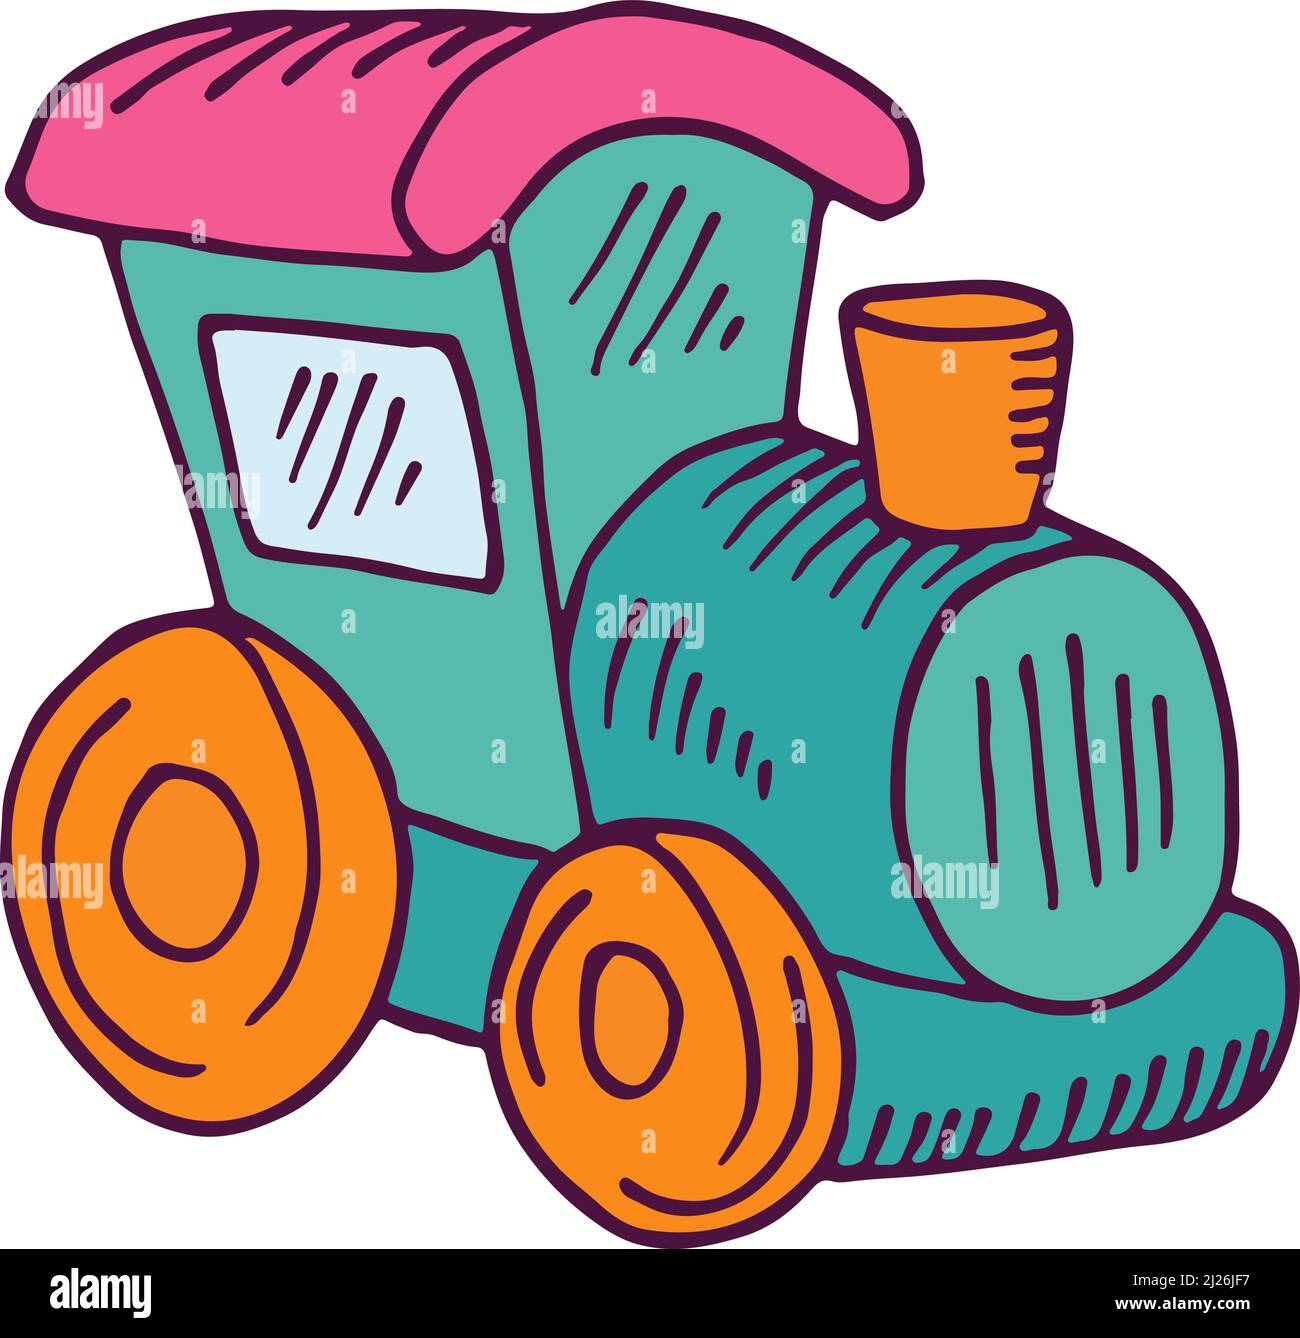 Child locomotive toy. Wooden train for kid playing Stock Vector